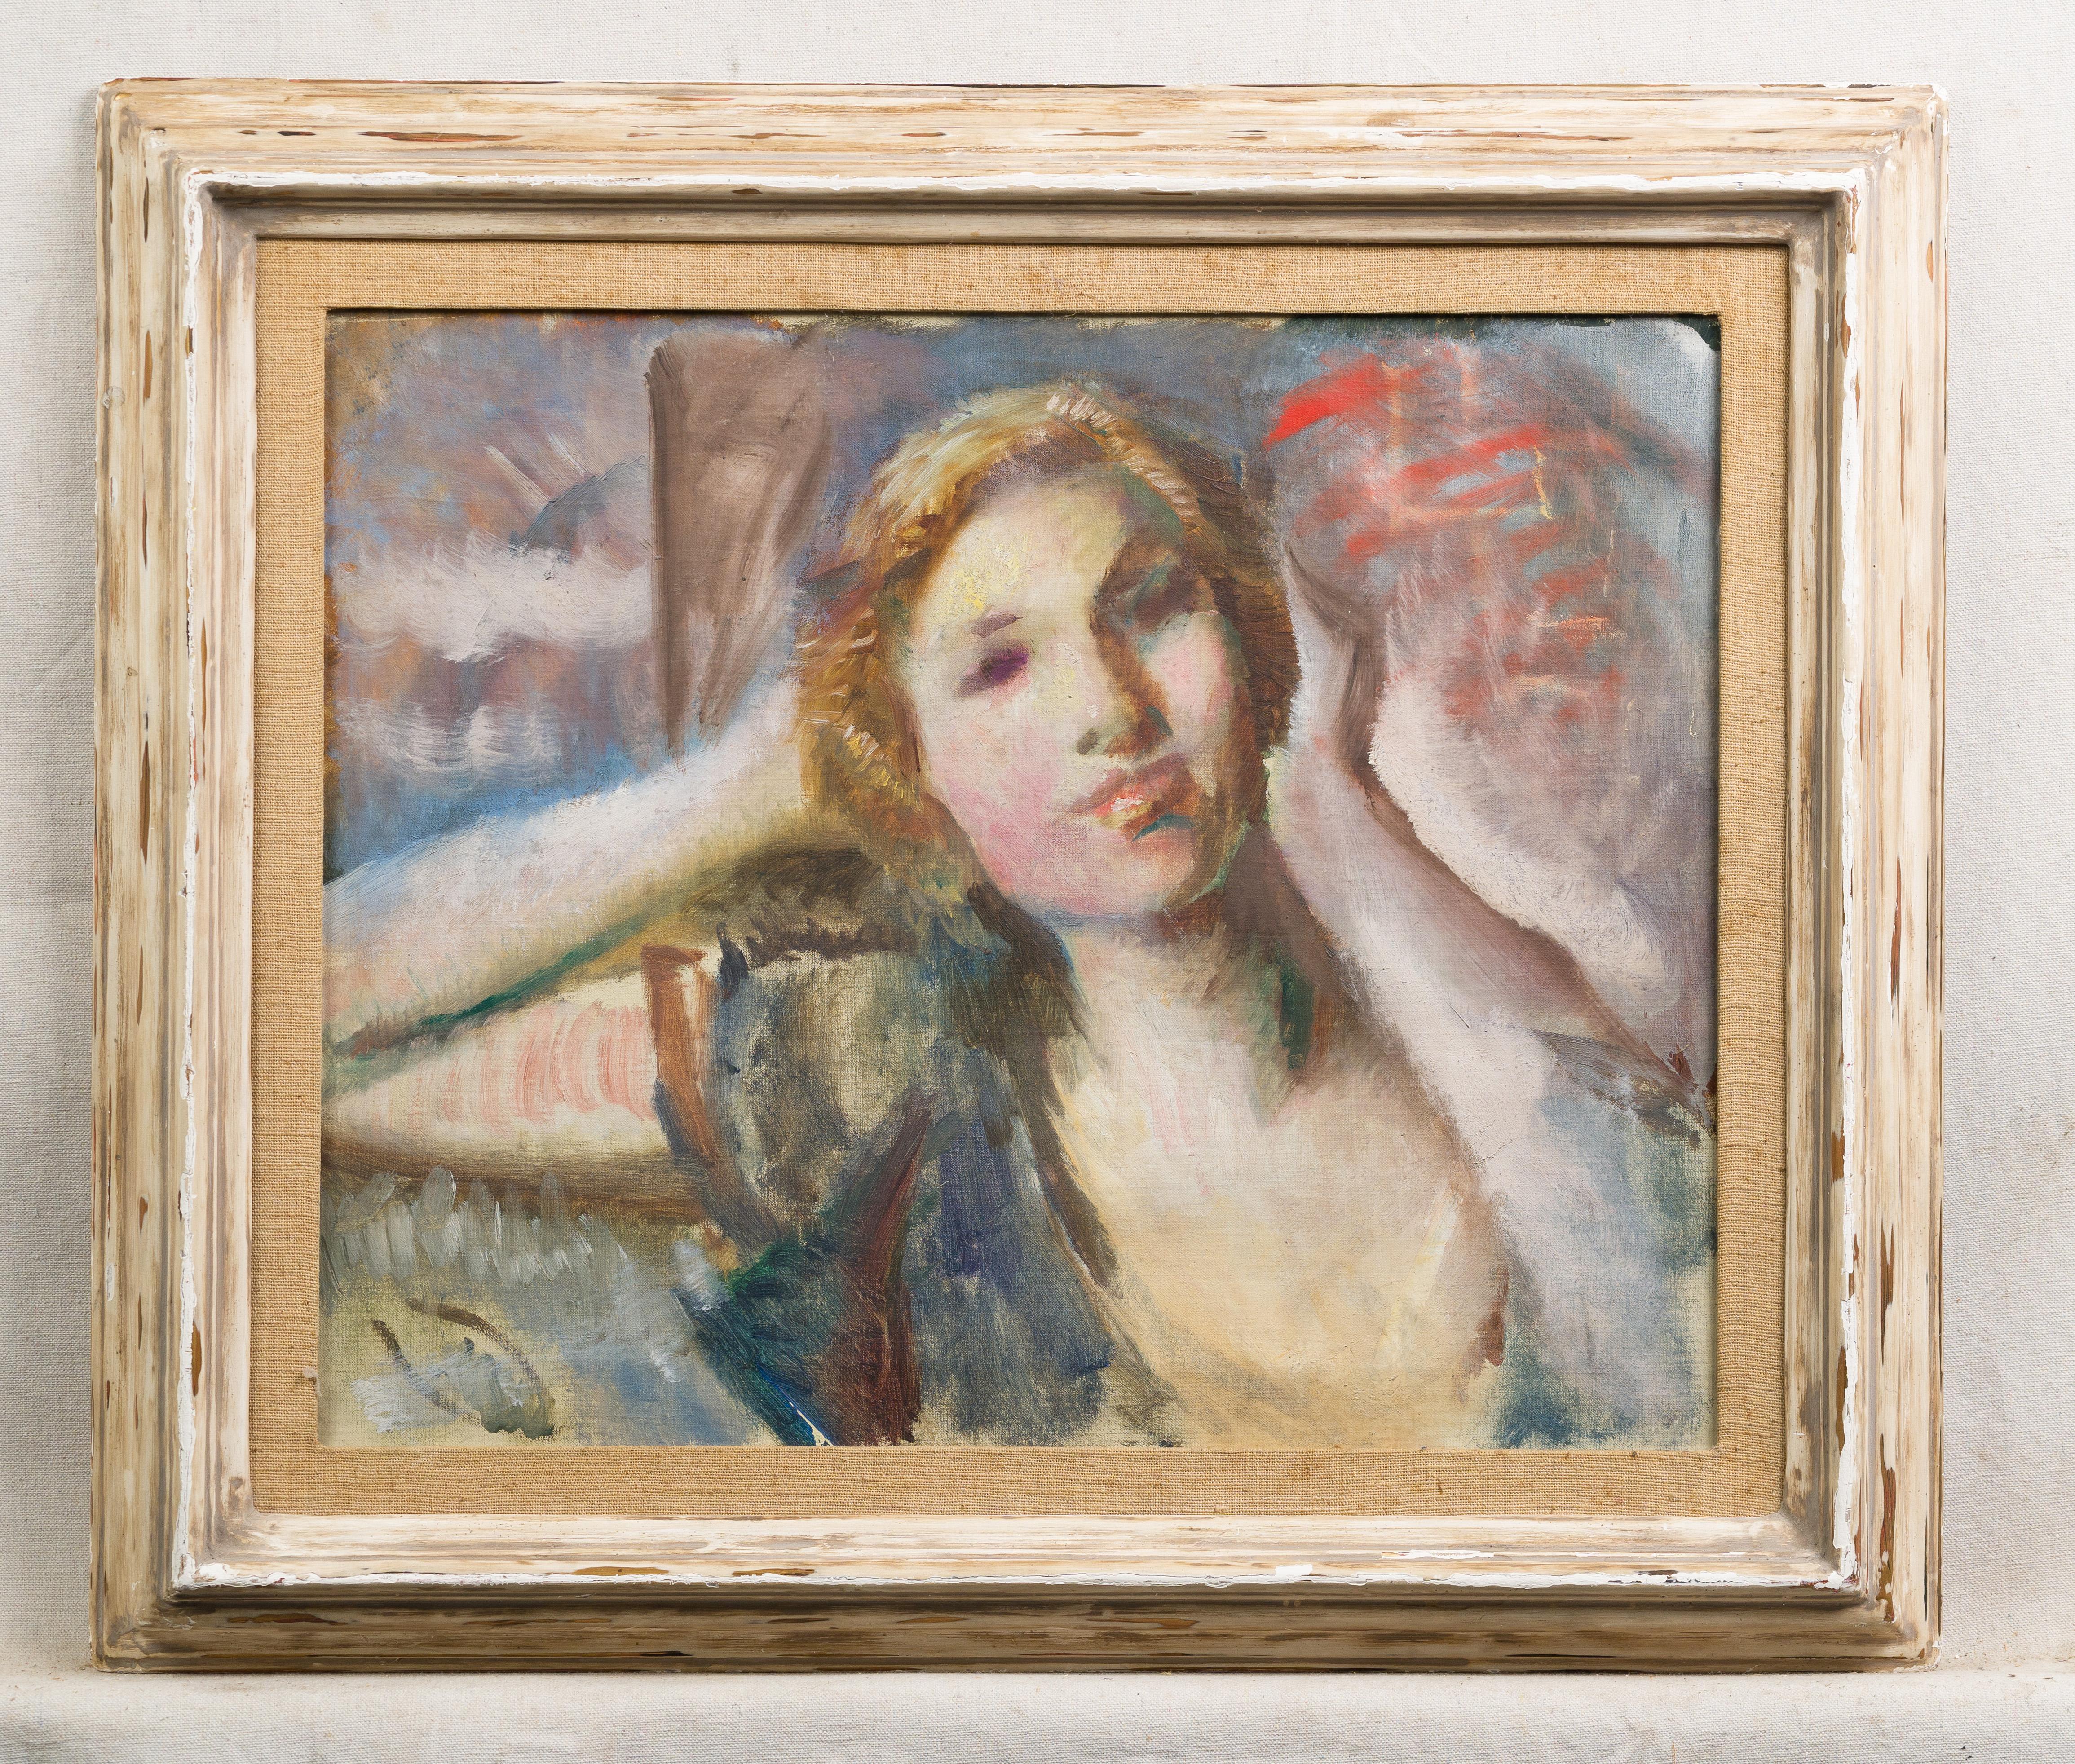 Antique American School Modernist Young Woman Framed Portrait Oil Painting For Sale 1